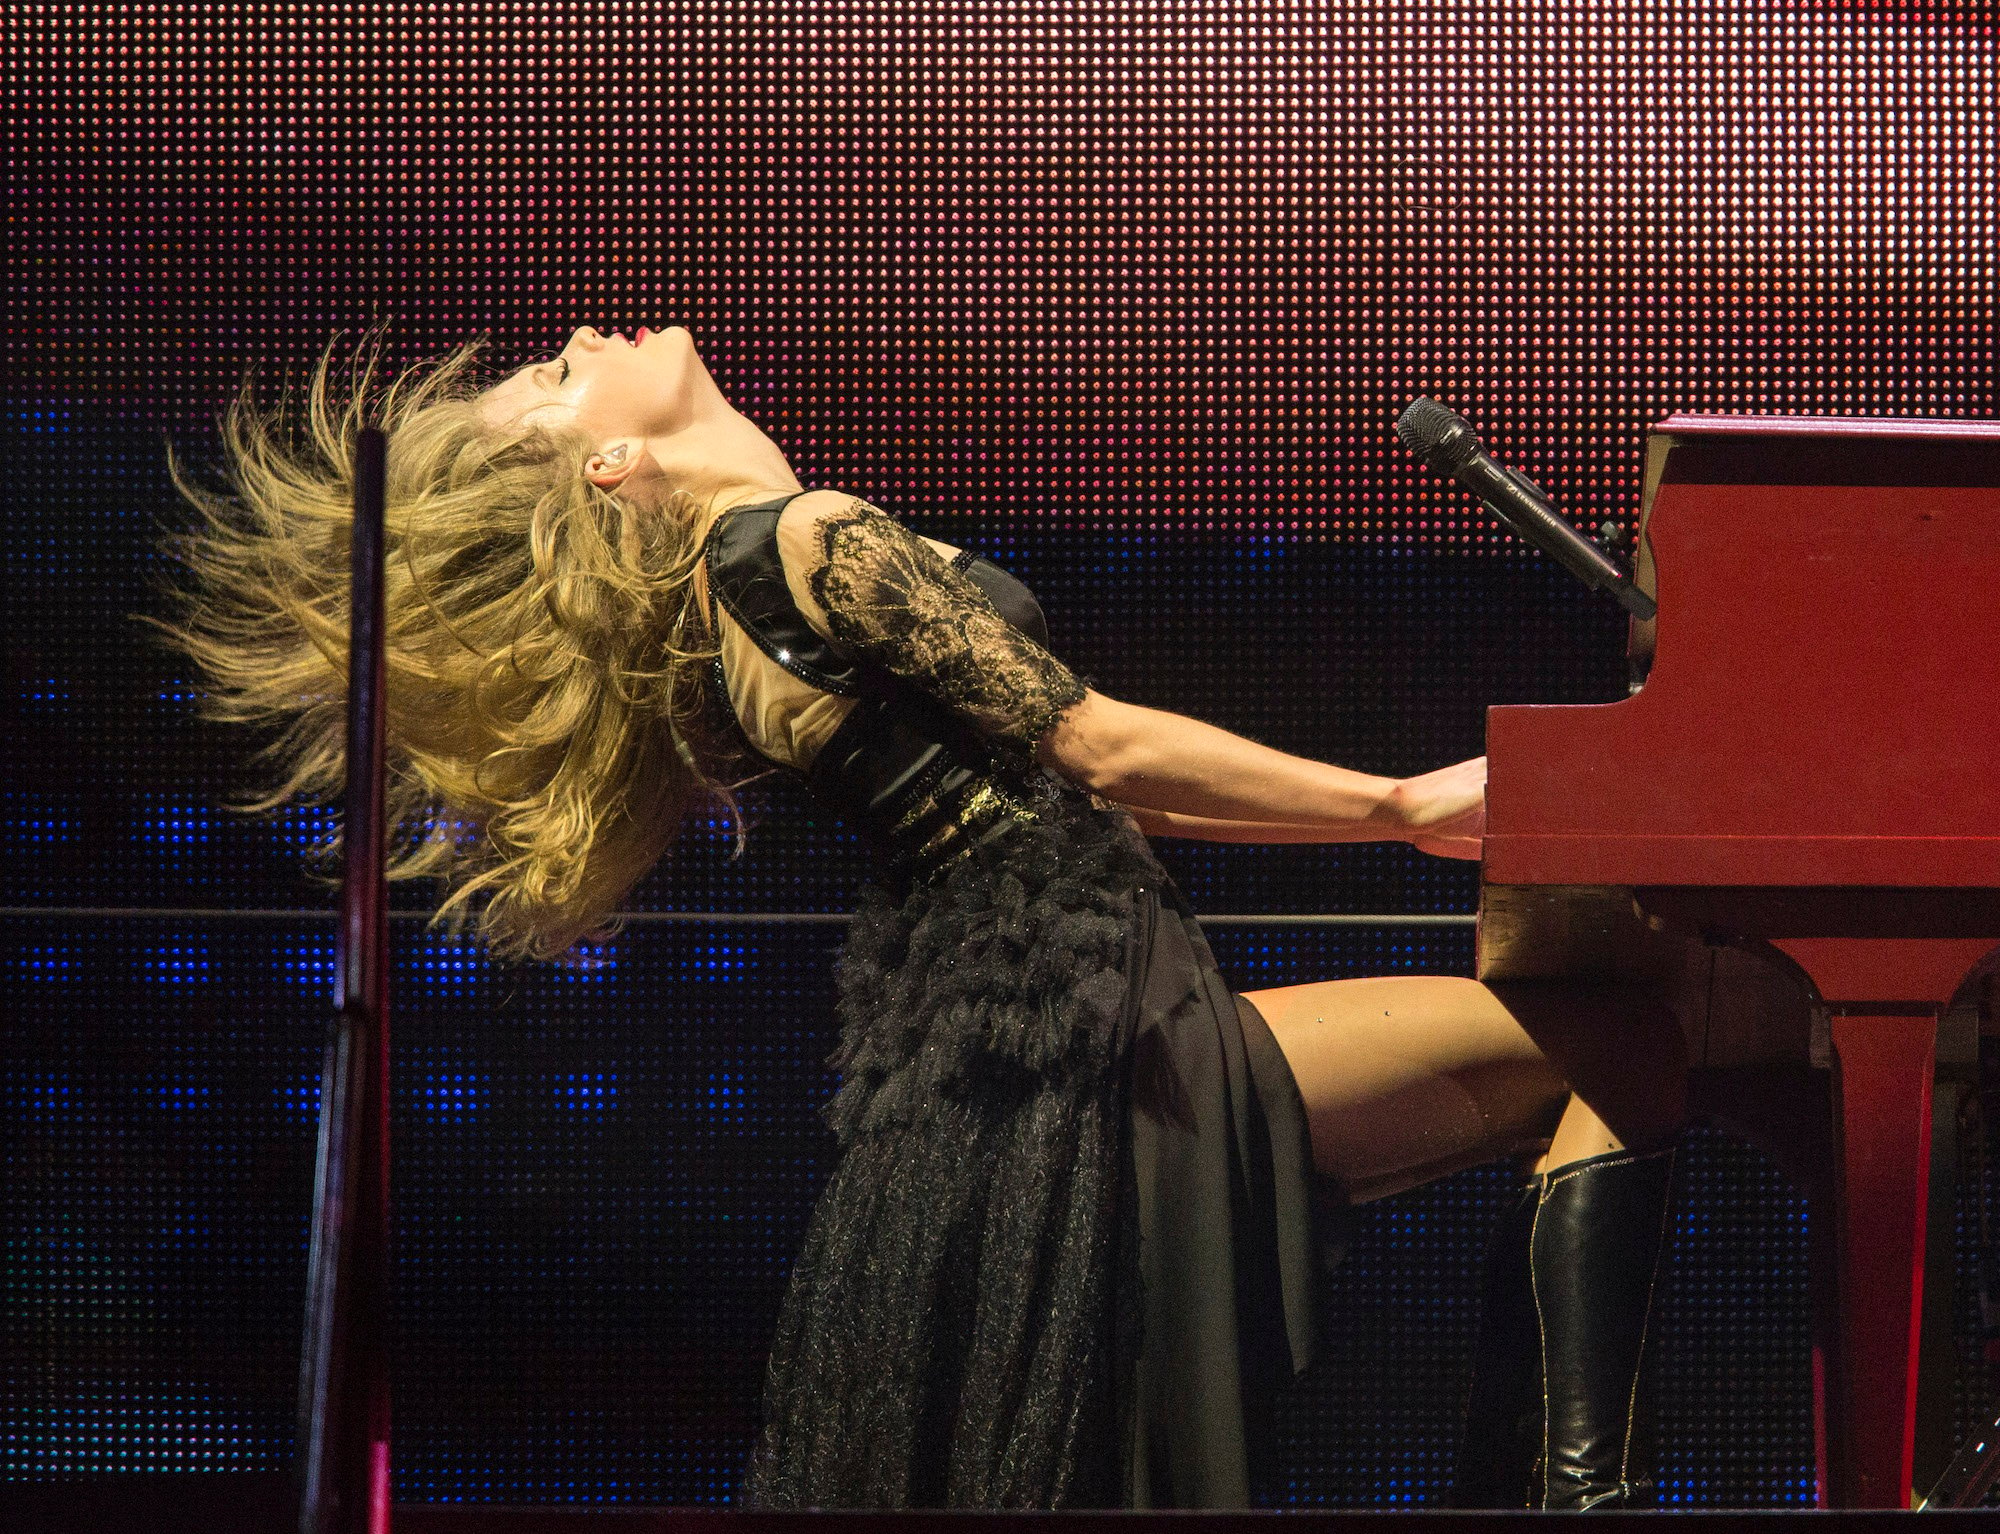 Taylor Swift plays for a sold-out crowd on the second of 13 North American stadium dates on The RED Tour at Cowboys Stadium (TX) on May 25, 2013.